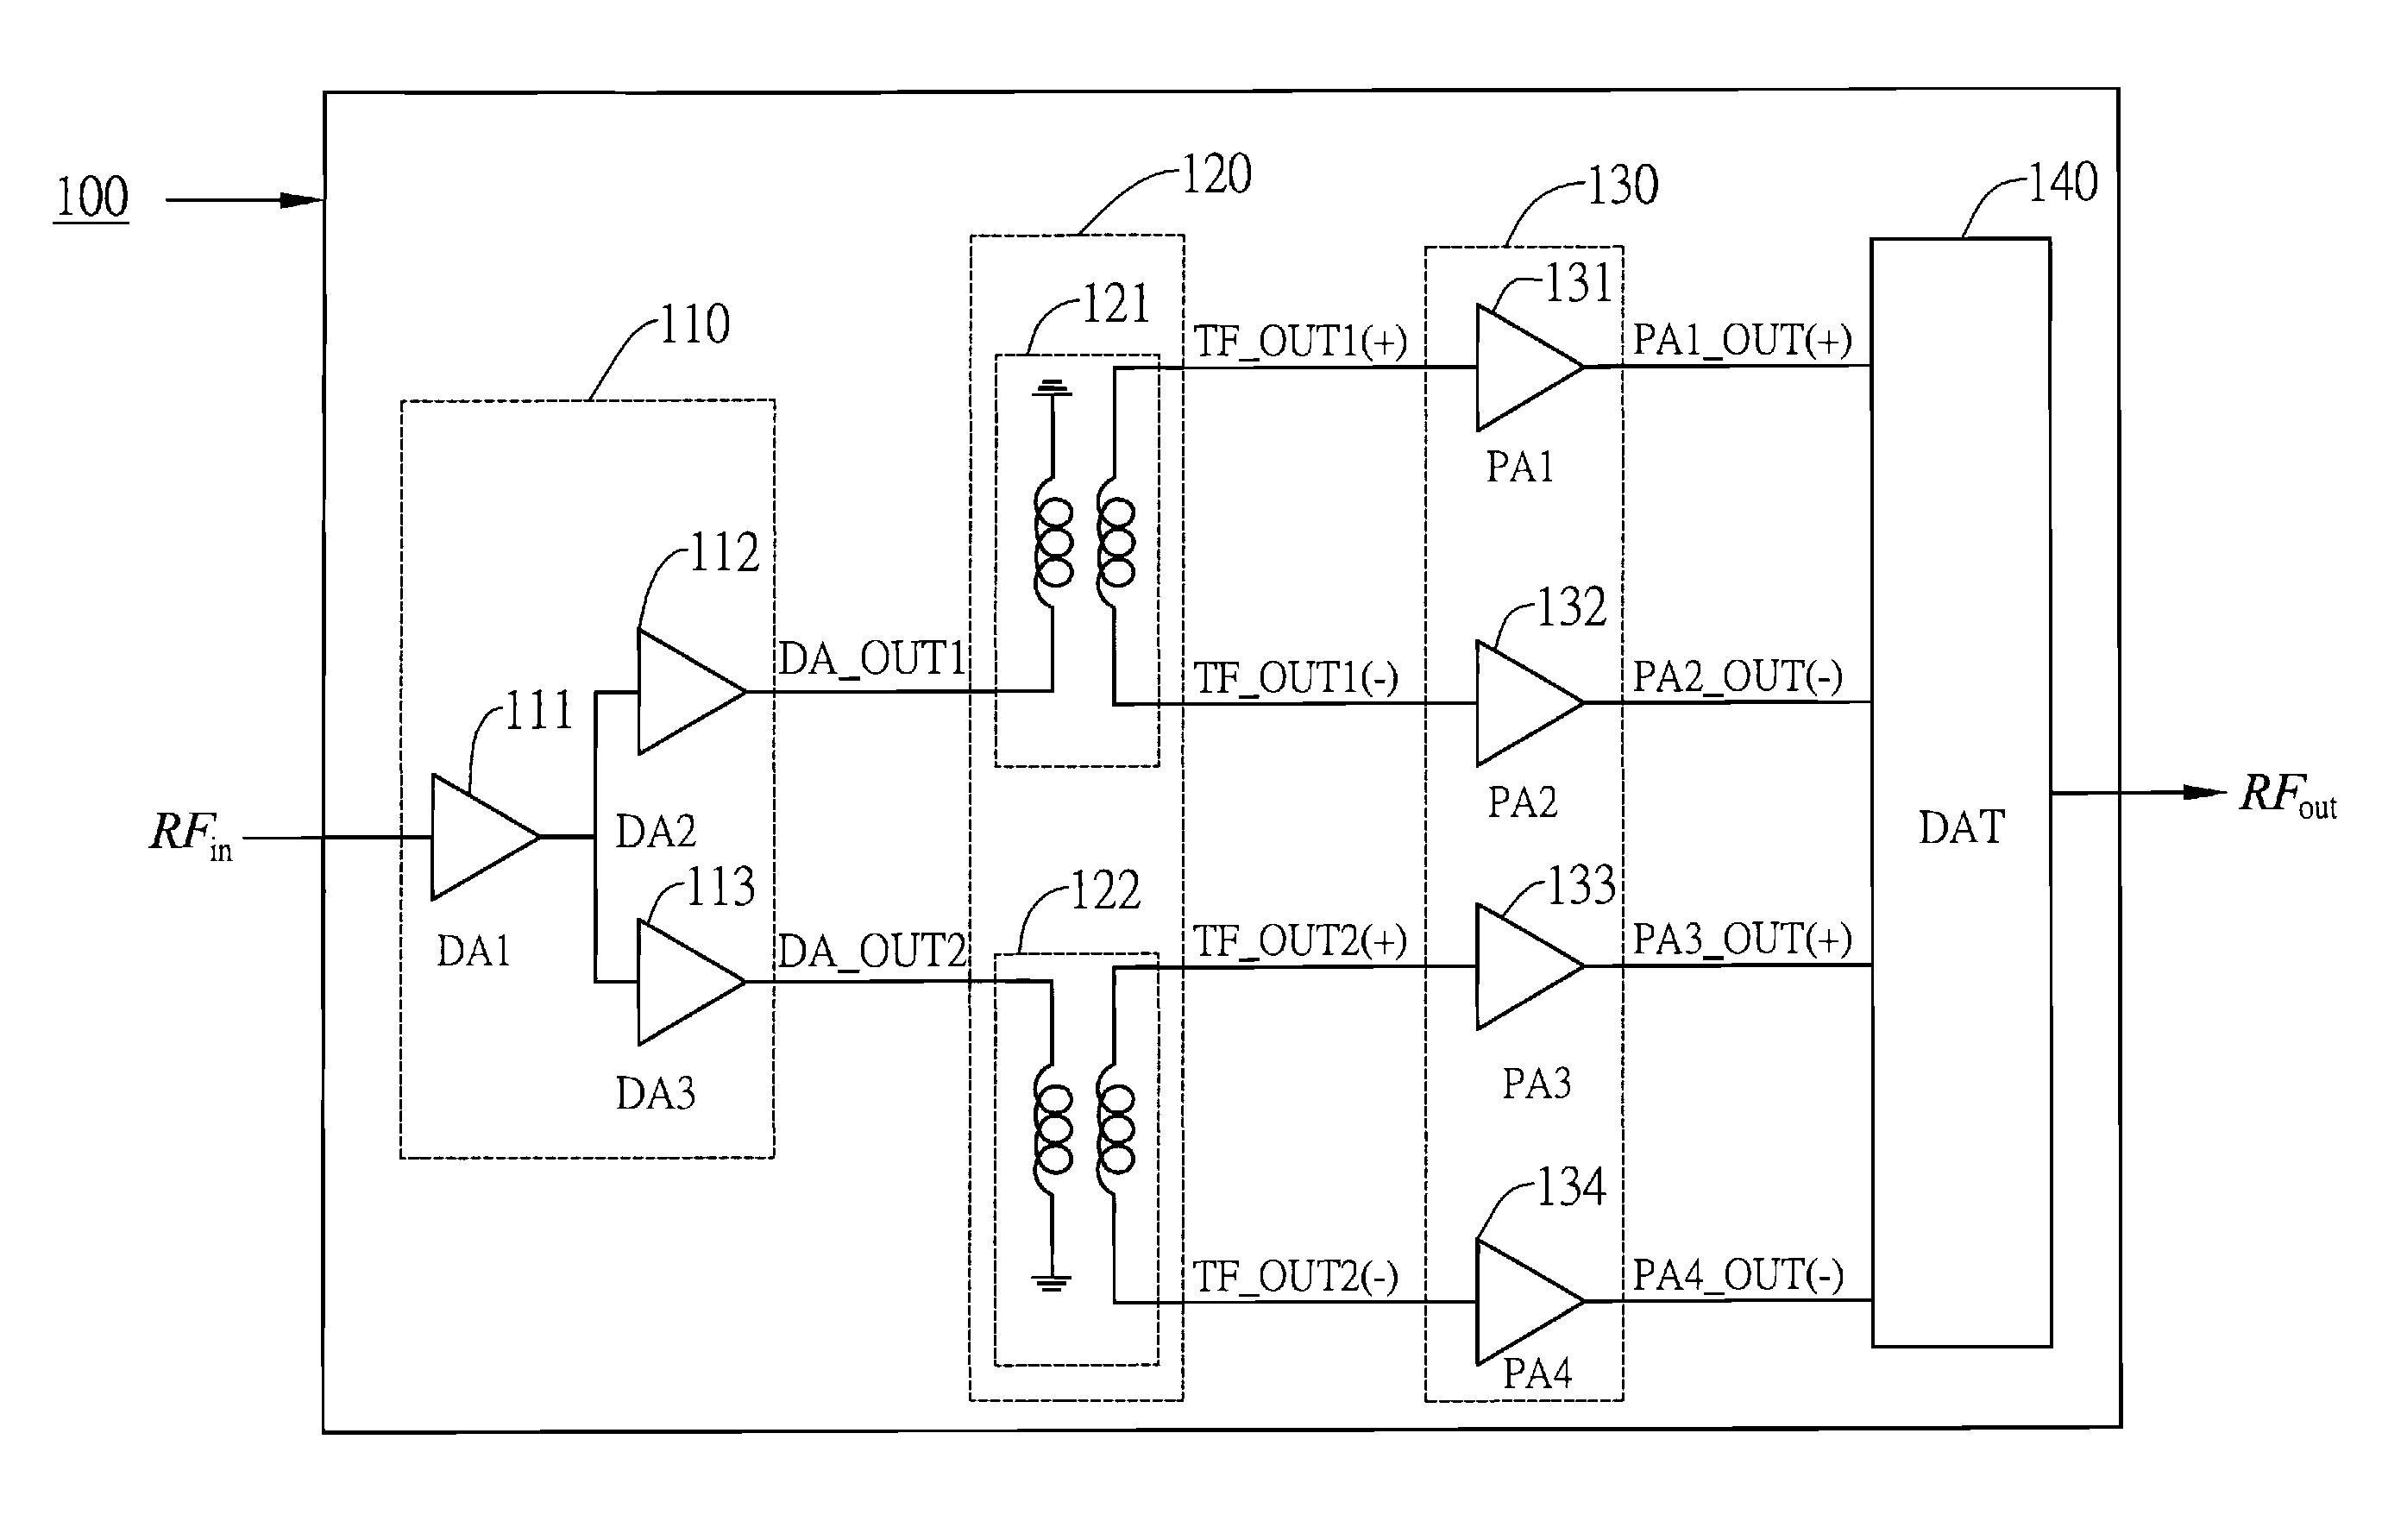 Distributed active transformer based millimeter-wave power amplifier circuit